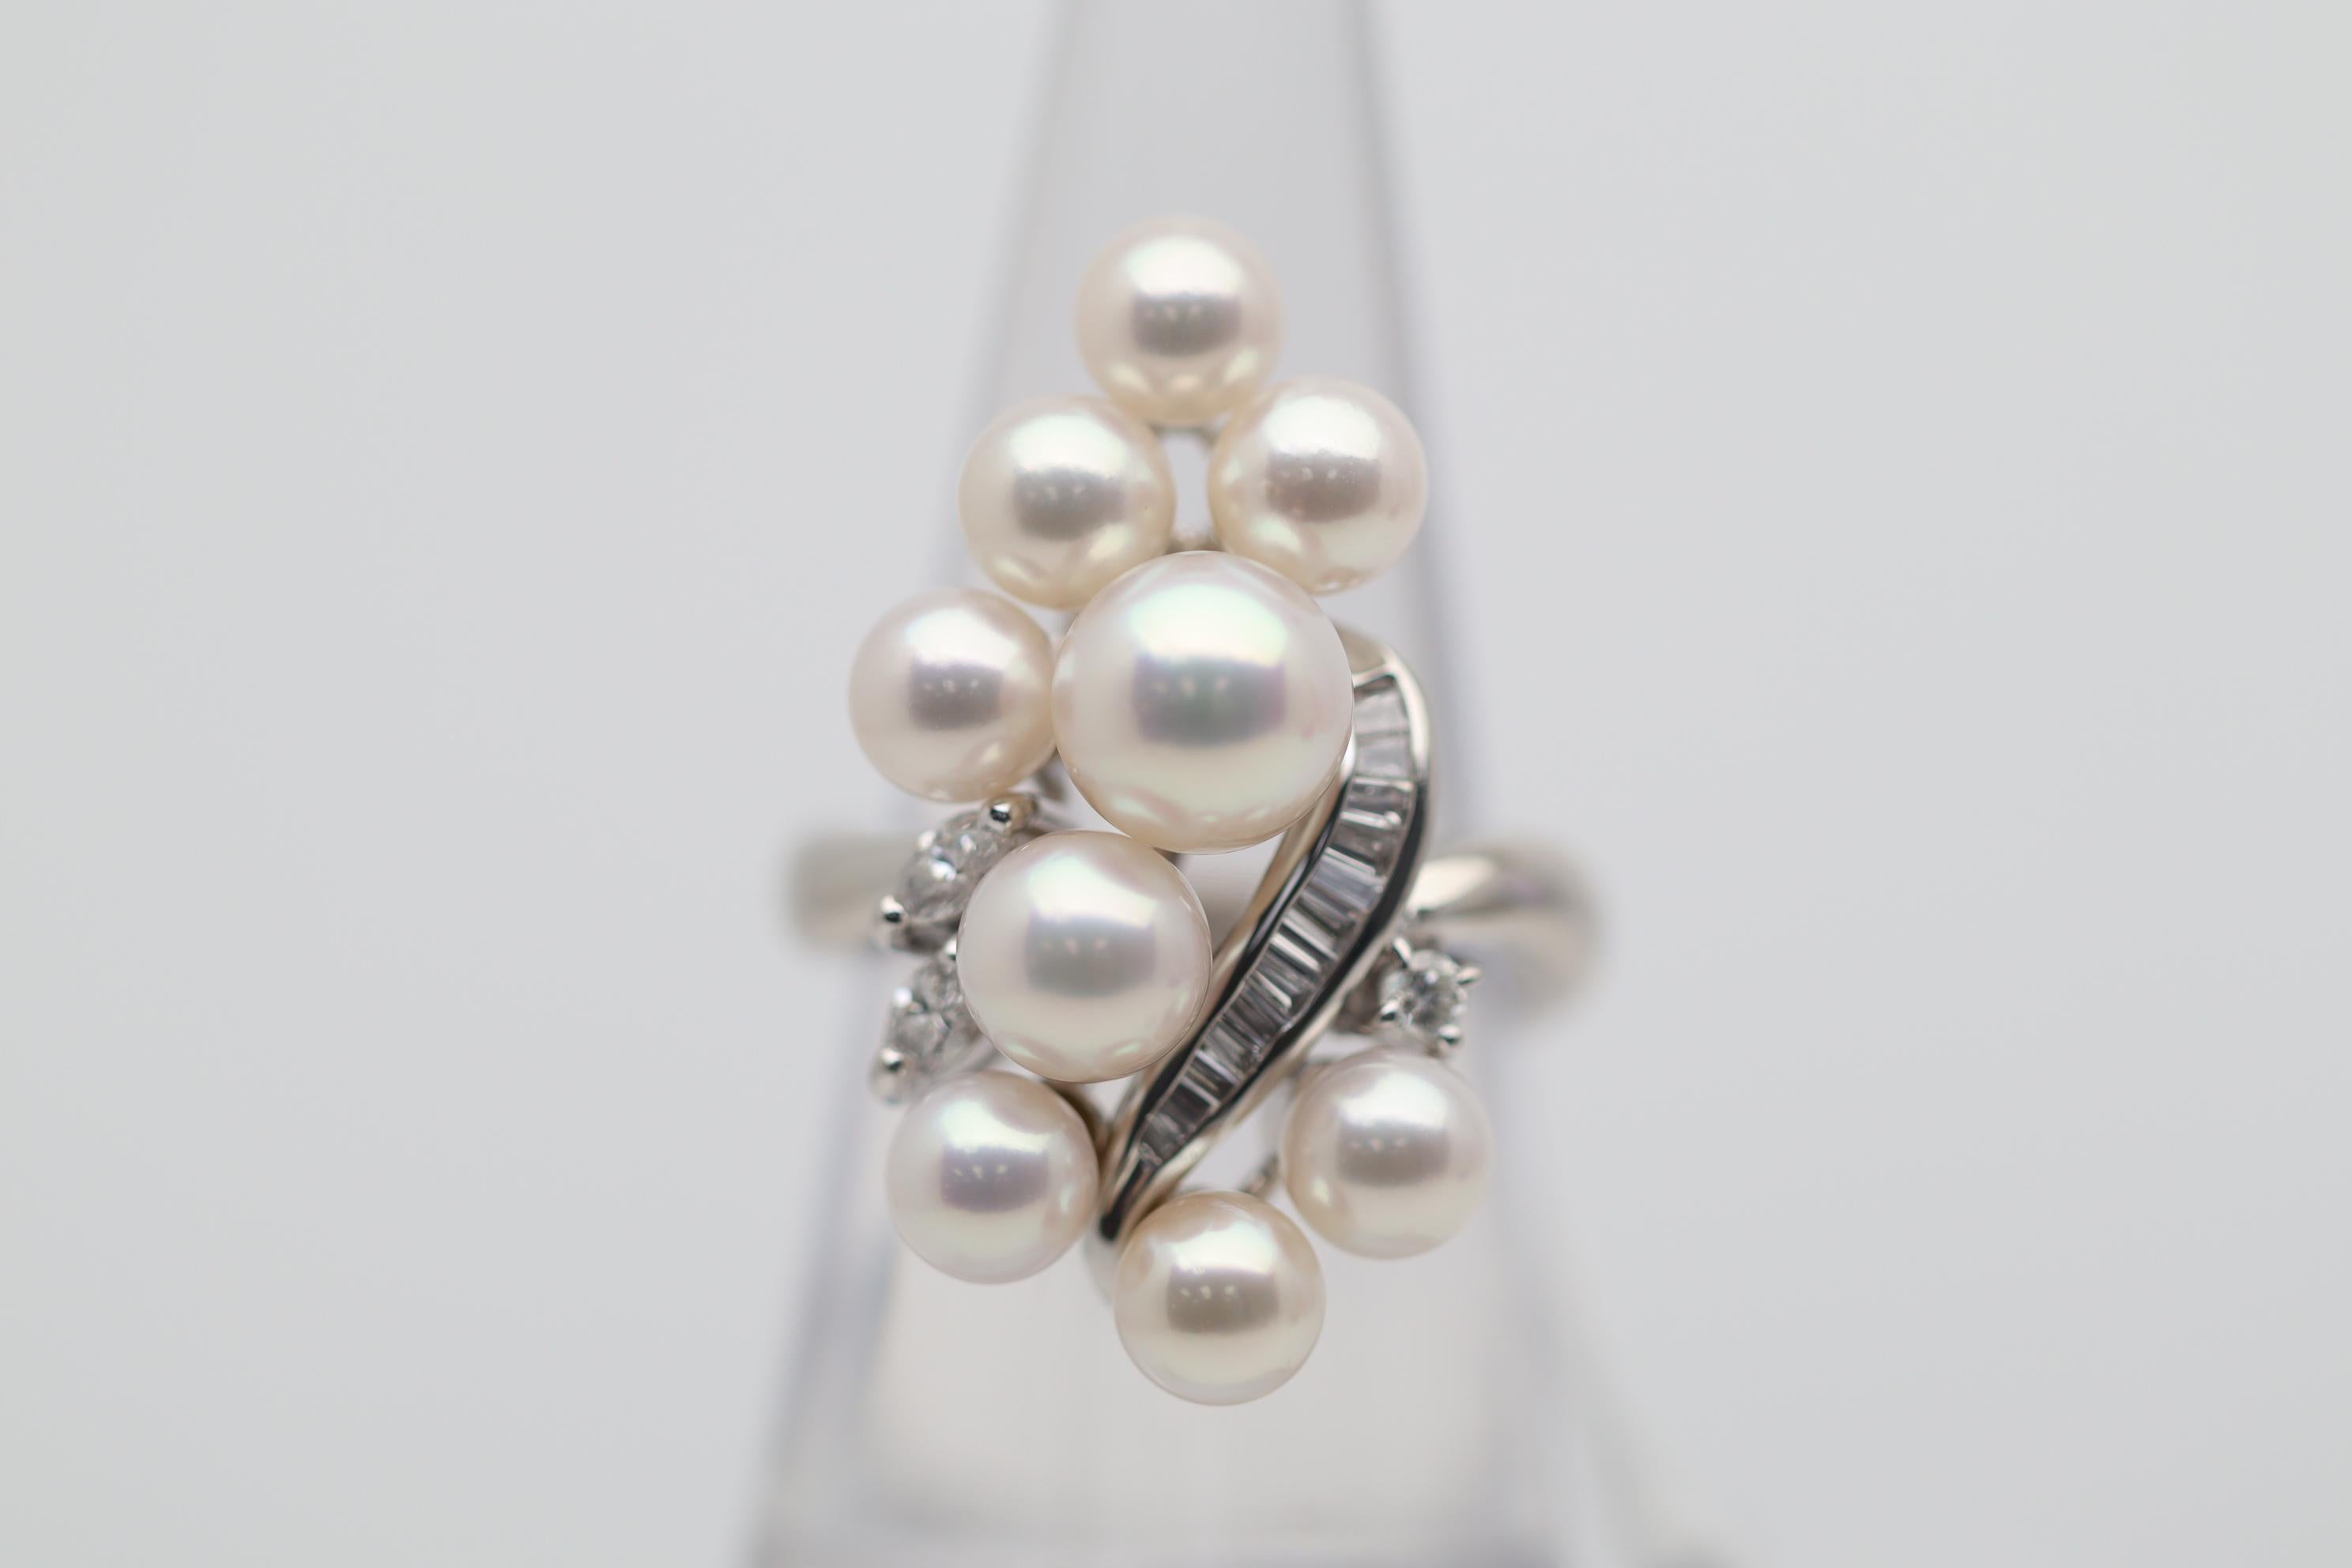 A stylish and chic platinum ring featuring 9 fine gem quality Akoya pearls. They range in size from 5.5mm – 8mm while each has excellent nacre quality, luster, and a strong pink overtone that glows in the light. They are complemented by 0.41 carats